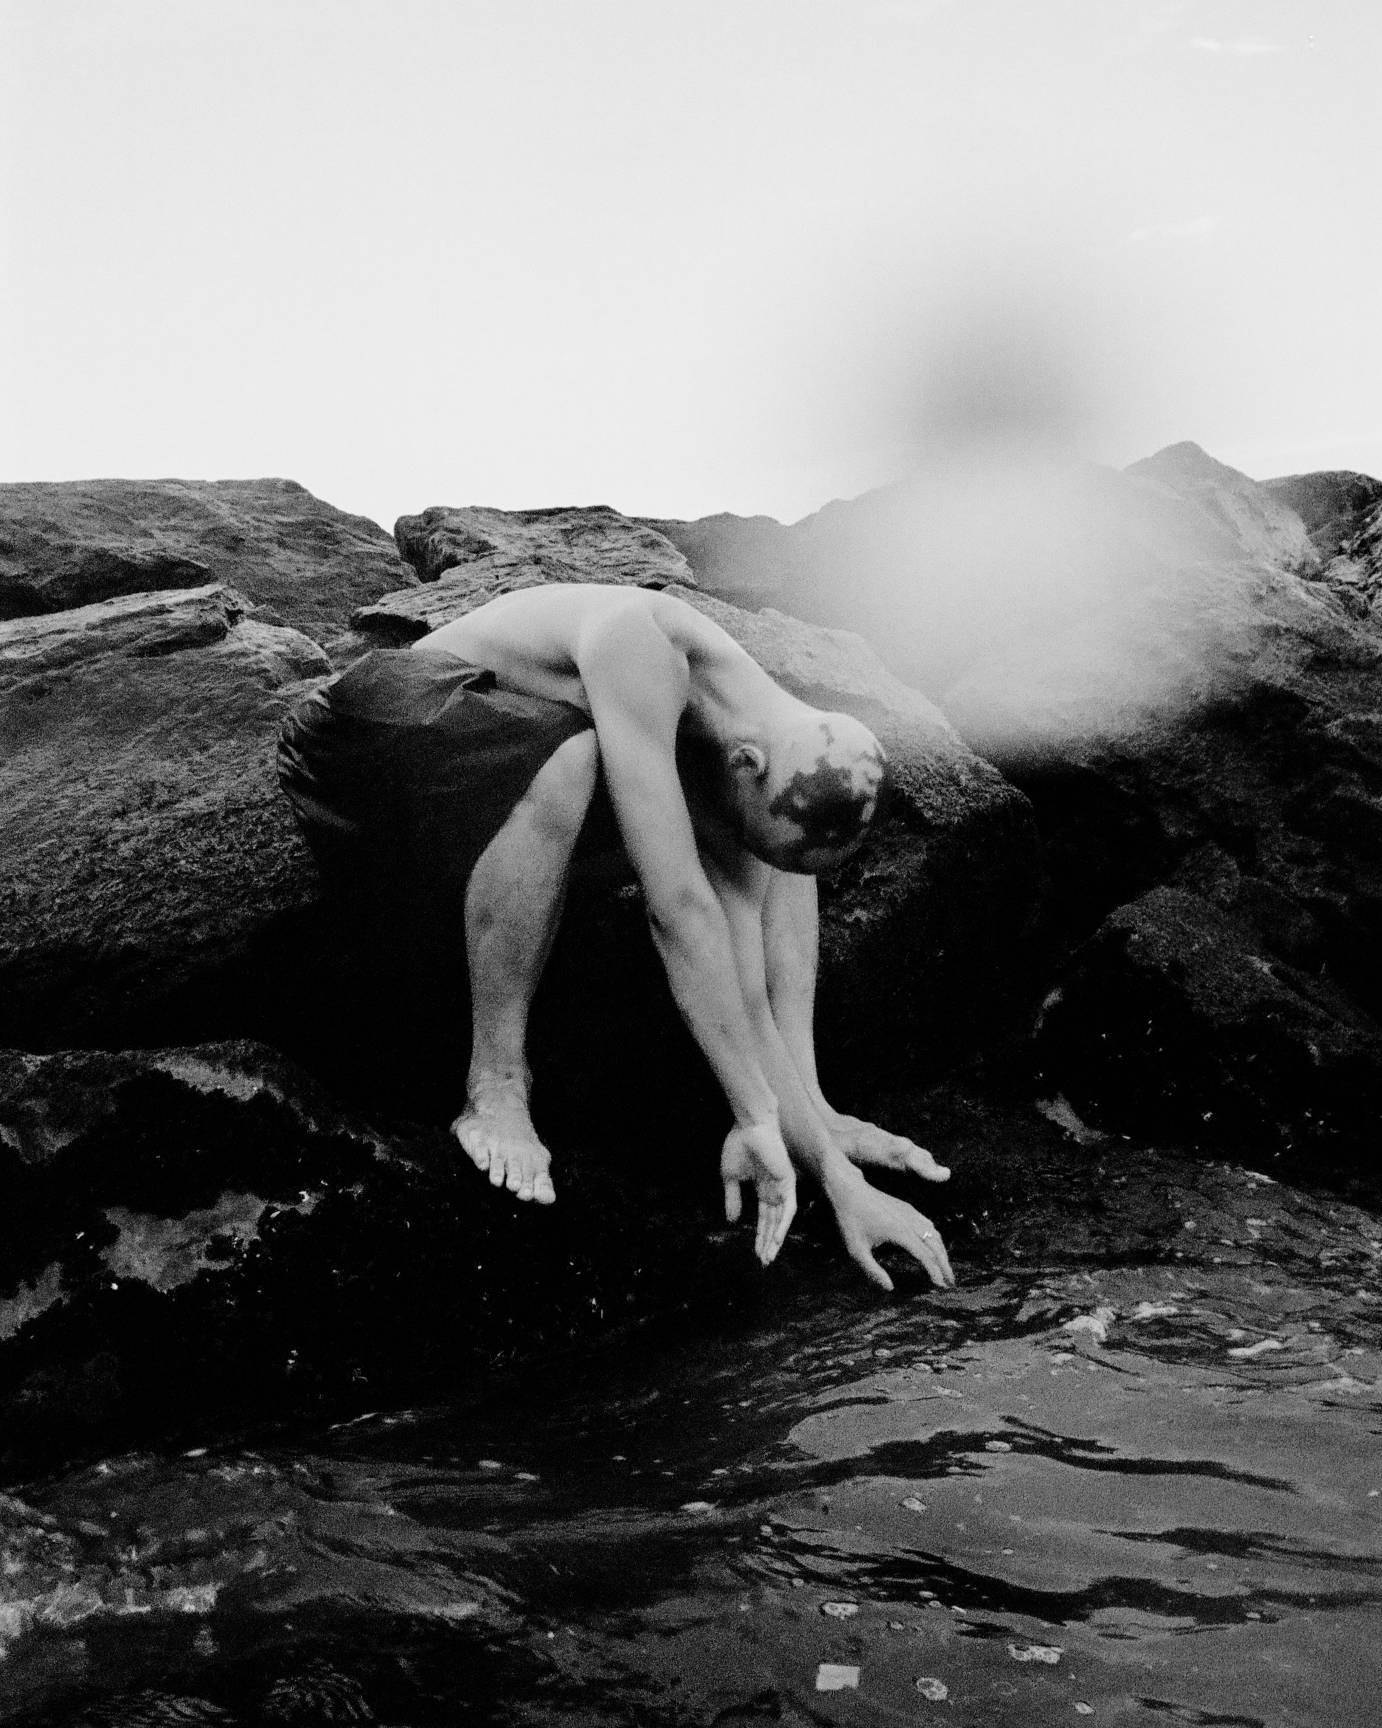 a black and white photo of a dancer crouched on boulders by the sea. The dancer wearing only pants or a skirt  melds into the landscape